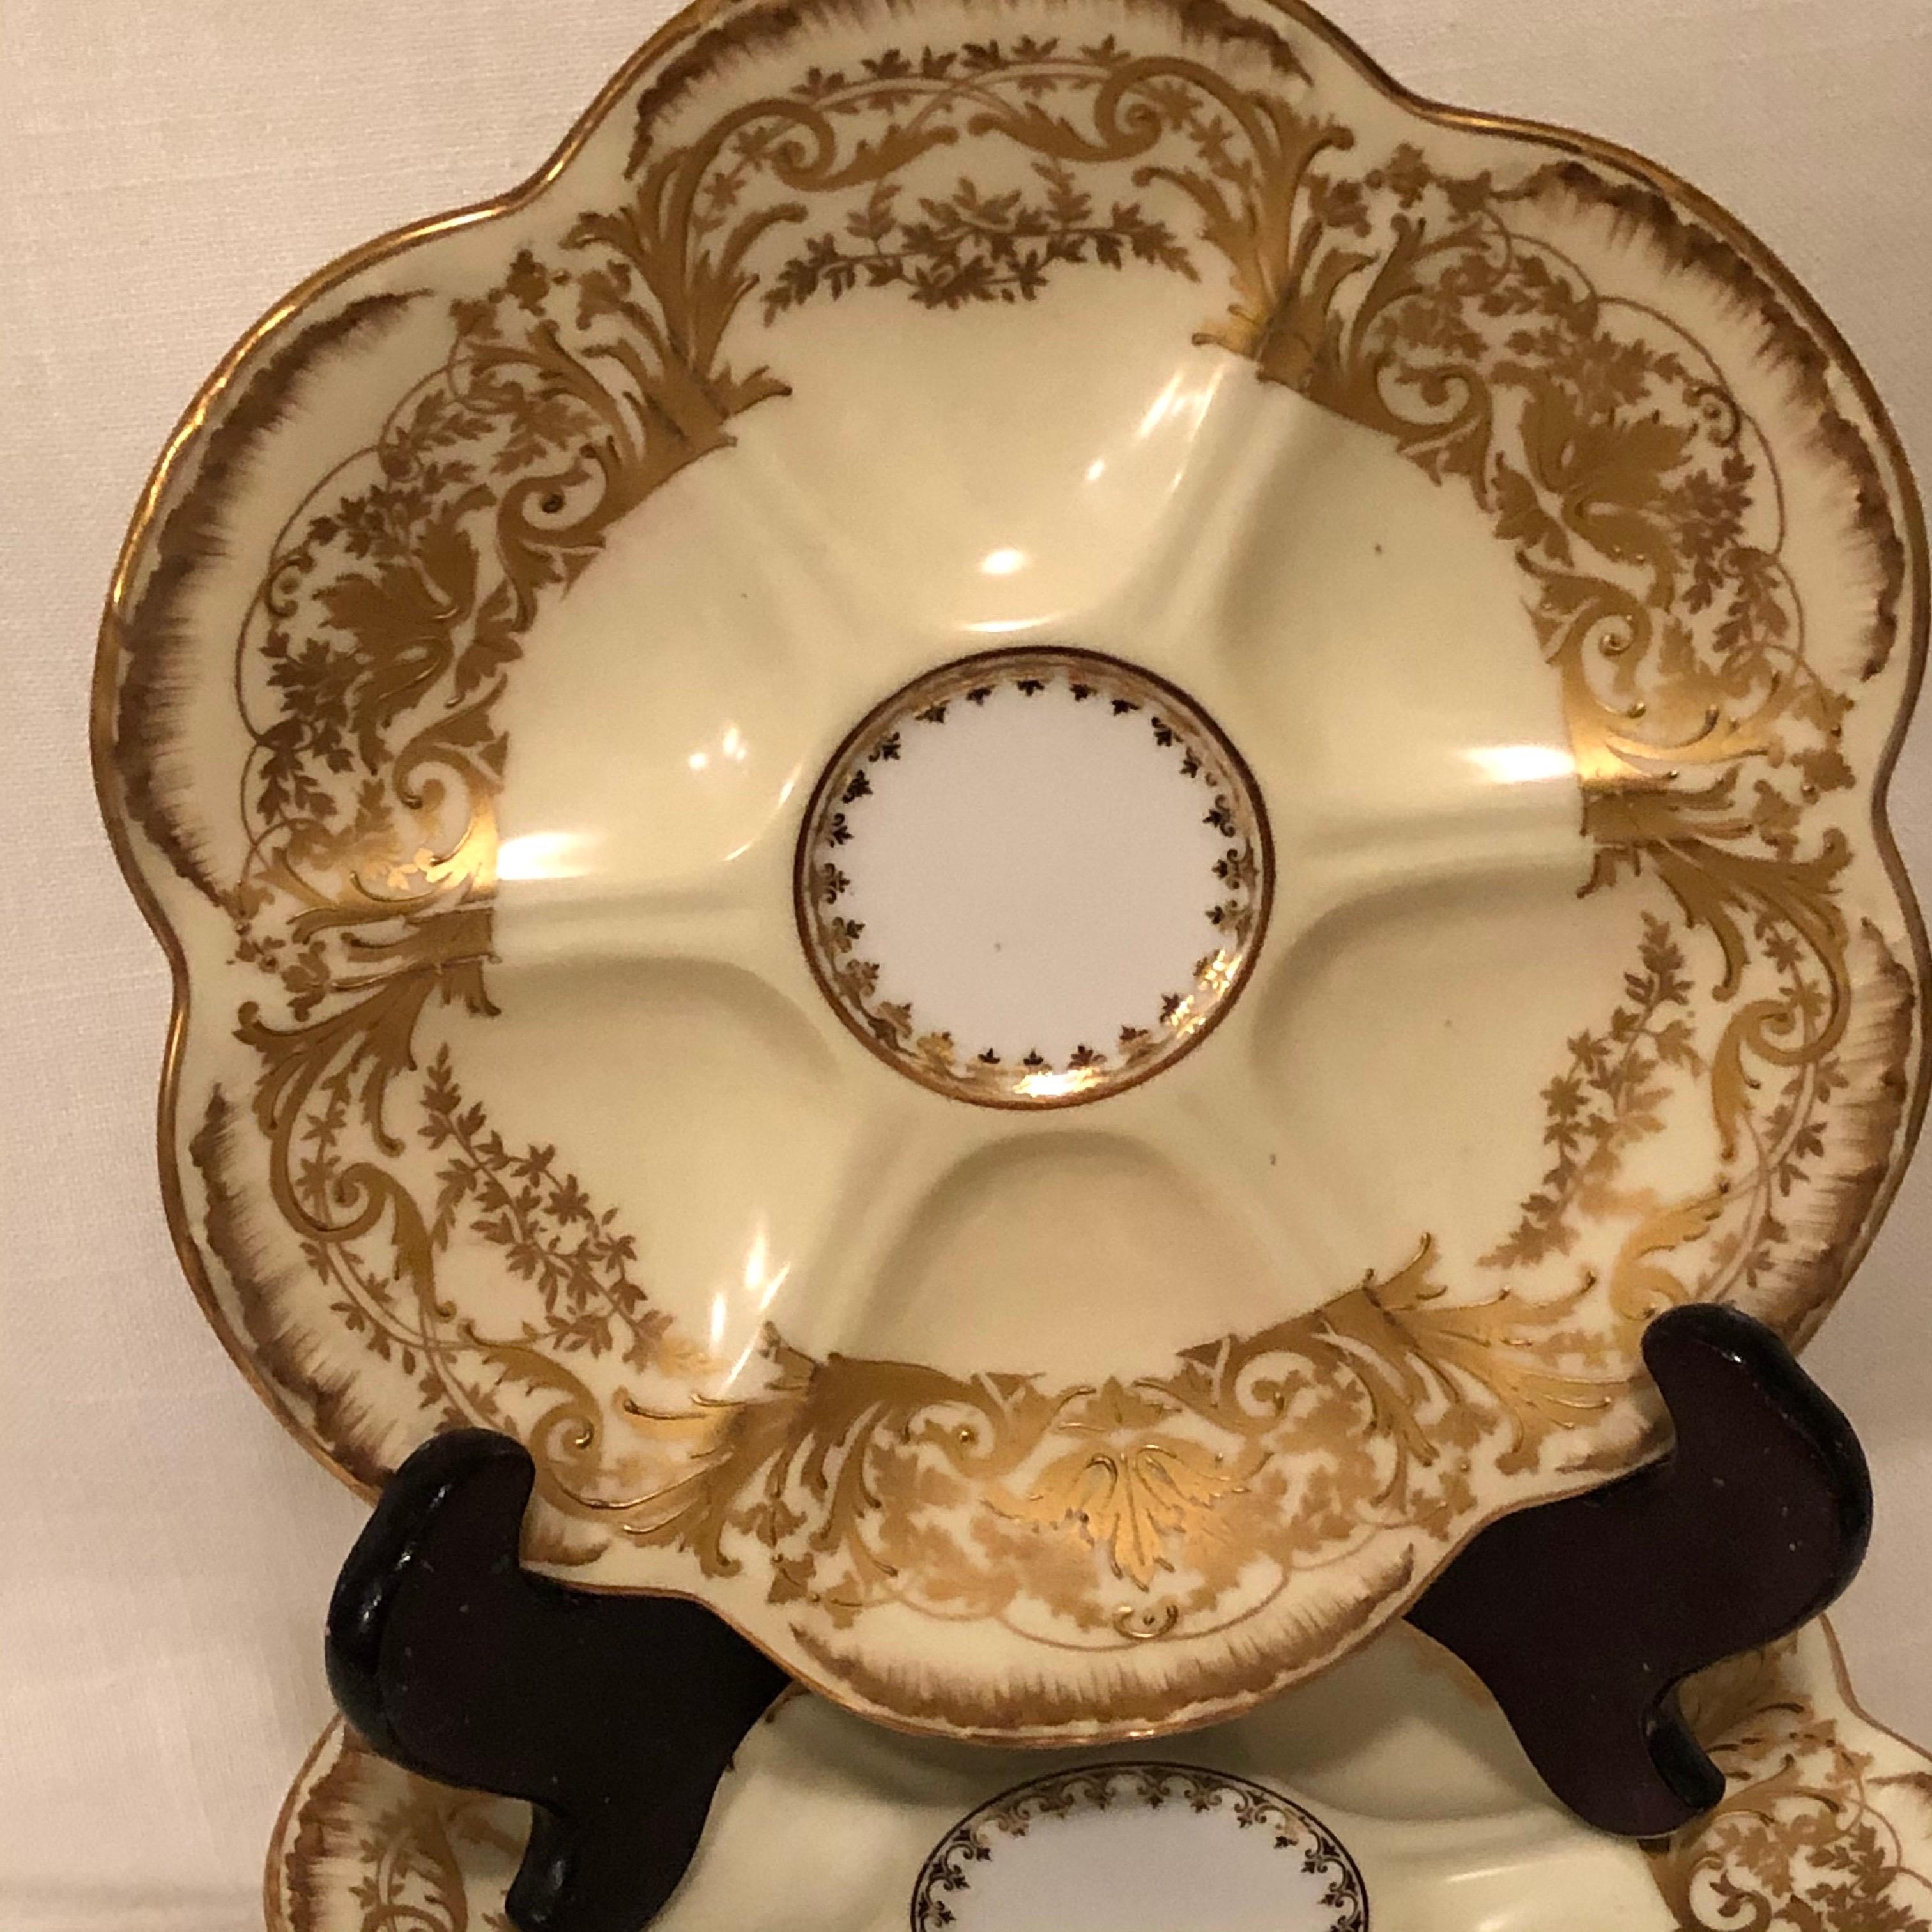 This is a beautiful set of eight Limoges, D& C, R. Delinieres and Co., oyster plates. Each oyster plate is decorated with profuse raised gilding. They are also signed L. Bernaudaud & Co. on the back. They have six wells around the plate and one well